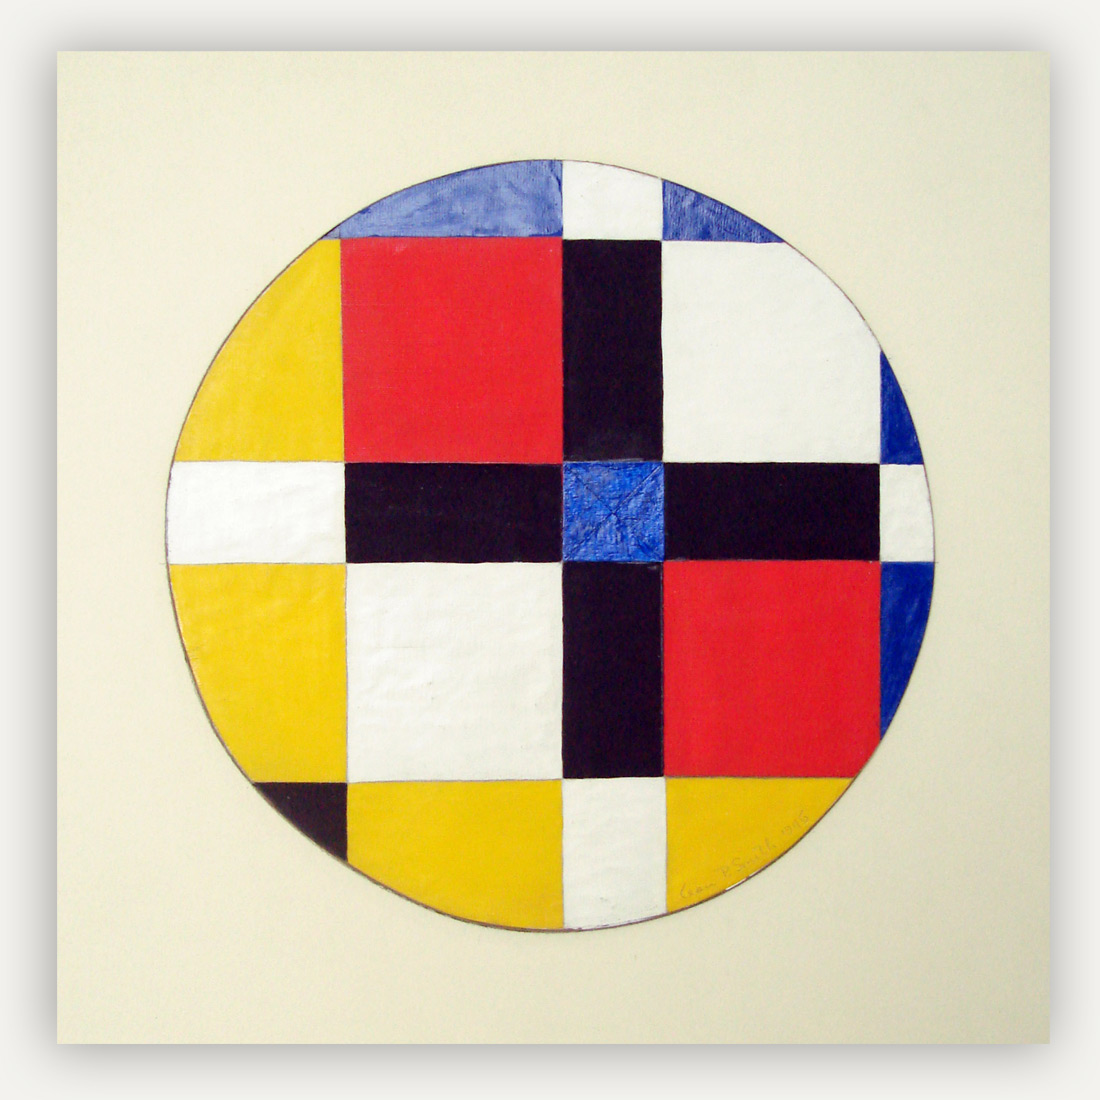 Circular tondo study on paper - geometric primary colors, rectangular and square shapes within the circle divide the colors